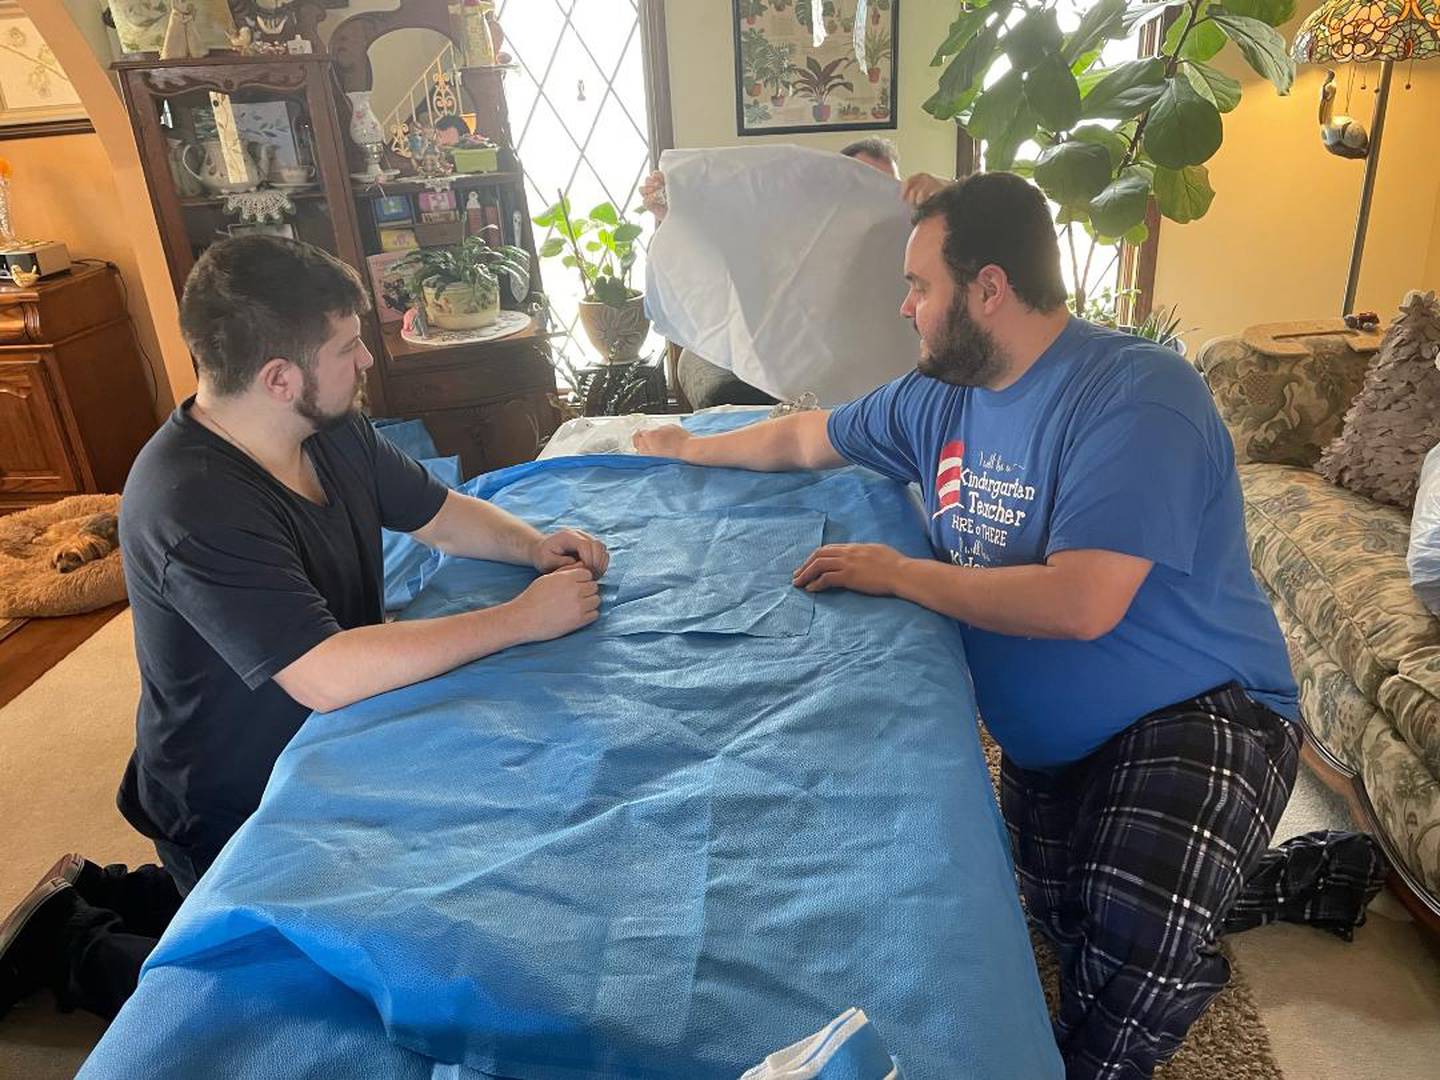 On Saturday, April 9, 2022, a small group of friends gathered at Kimberly Creasey's home in Joliet to create waterproof sleeping bags out of expired surgical drapes. The sleeping bags were sent to Poland, where they will be distributed to people from Ukraine in need. Pictured, from left, is Greg Aimaro of New Lenox and Michael Creasey of Joliet as they pin surgical drapes to prepare for sewing.